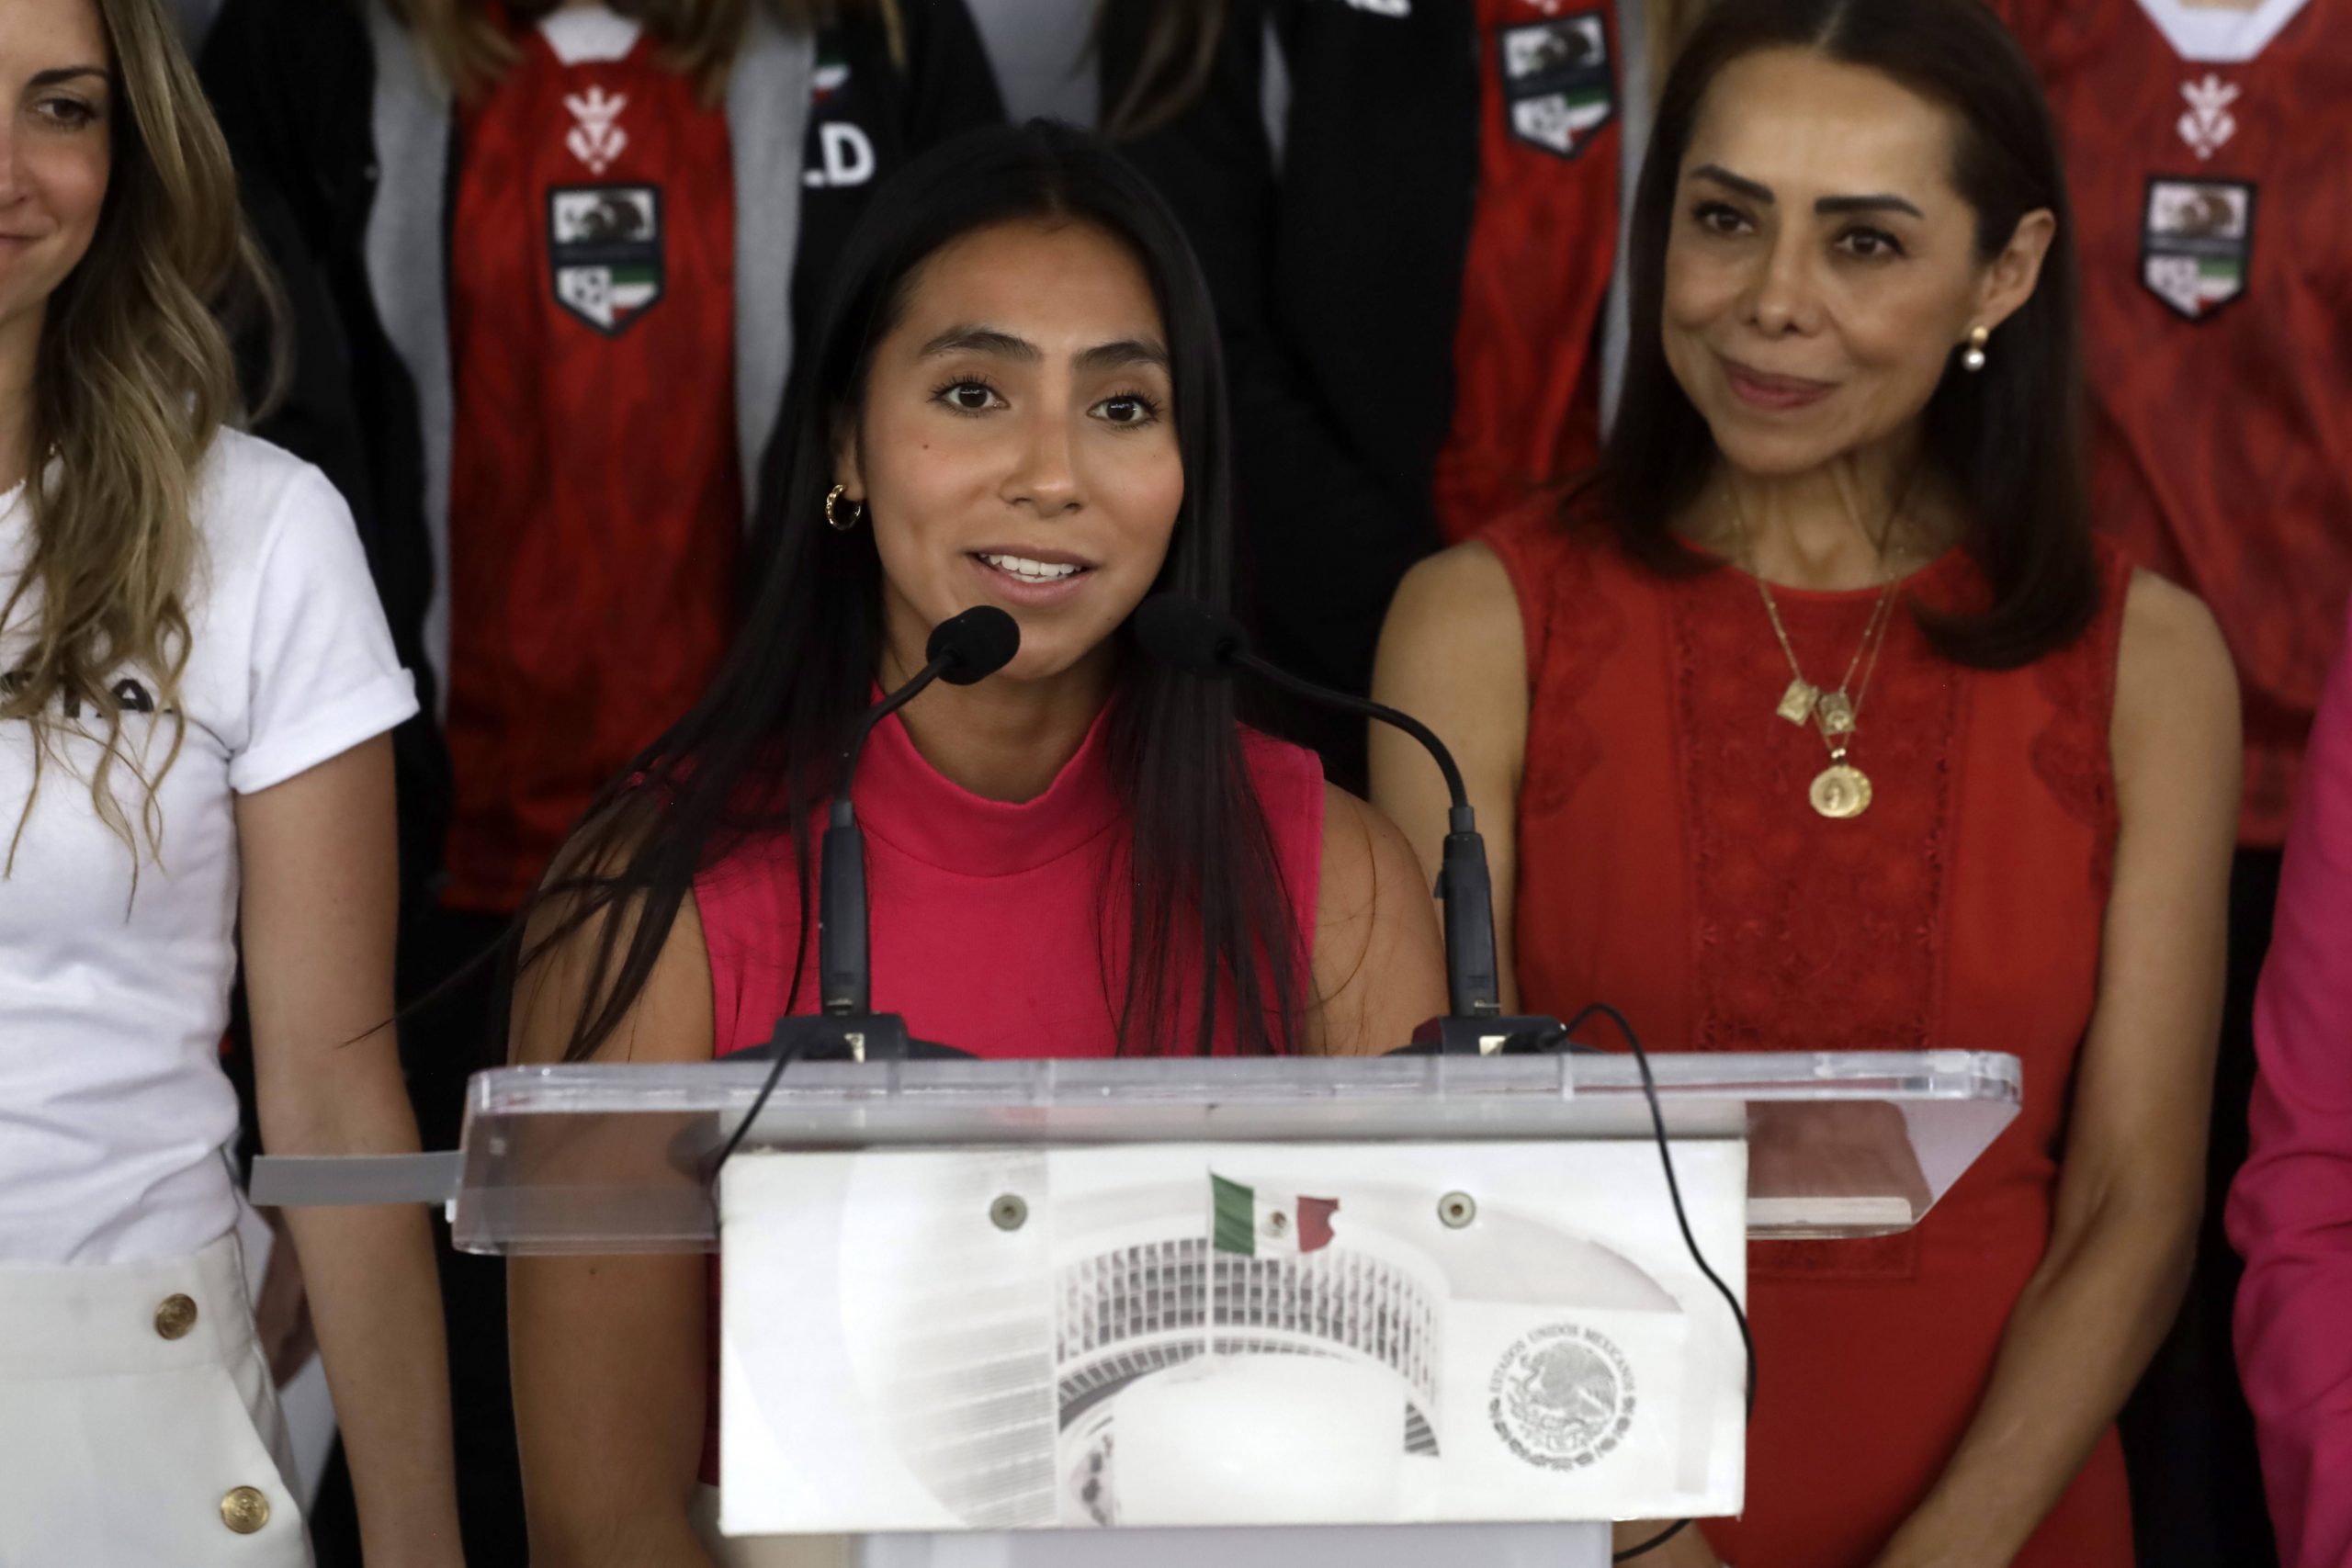 April 25, 2023, Mexico City, Mexico: Diana Flores, captain of the Mexican flag football team, at a press conference at the conclusion of the Gender Parity Forum in the World of Sports at the Senate in Mexico City. on April 25, 2023 in Mexico City, Mexico Mexico City Mexico - ZUMAe321 20230426_zia_e321_039 Copyright: xLuisxBarronx